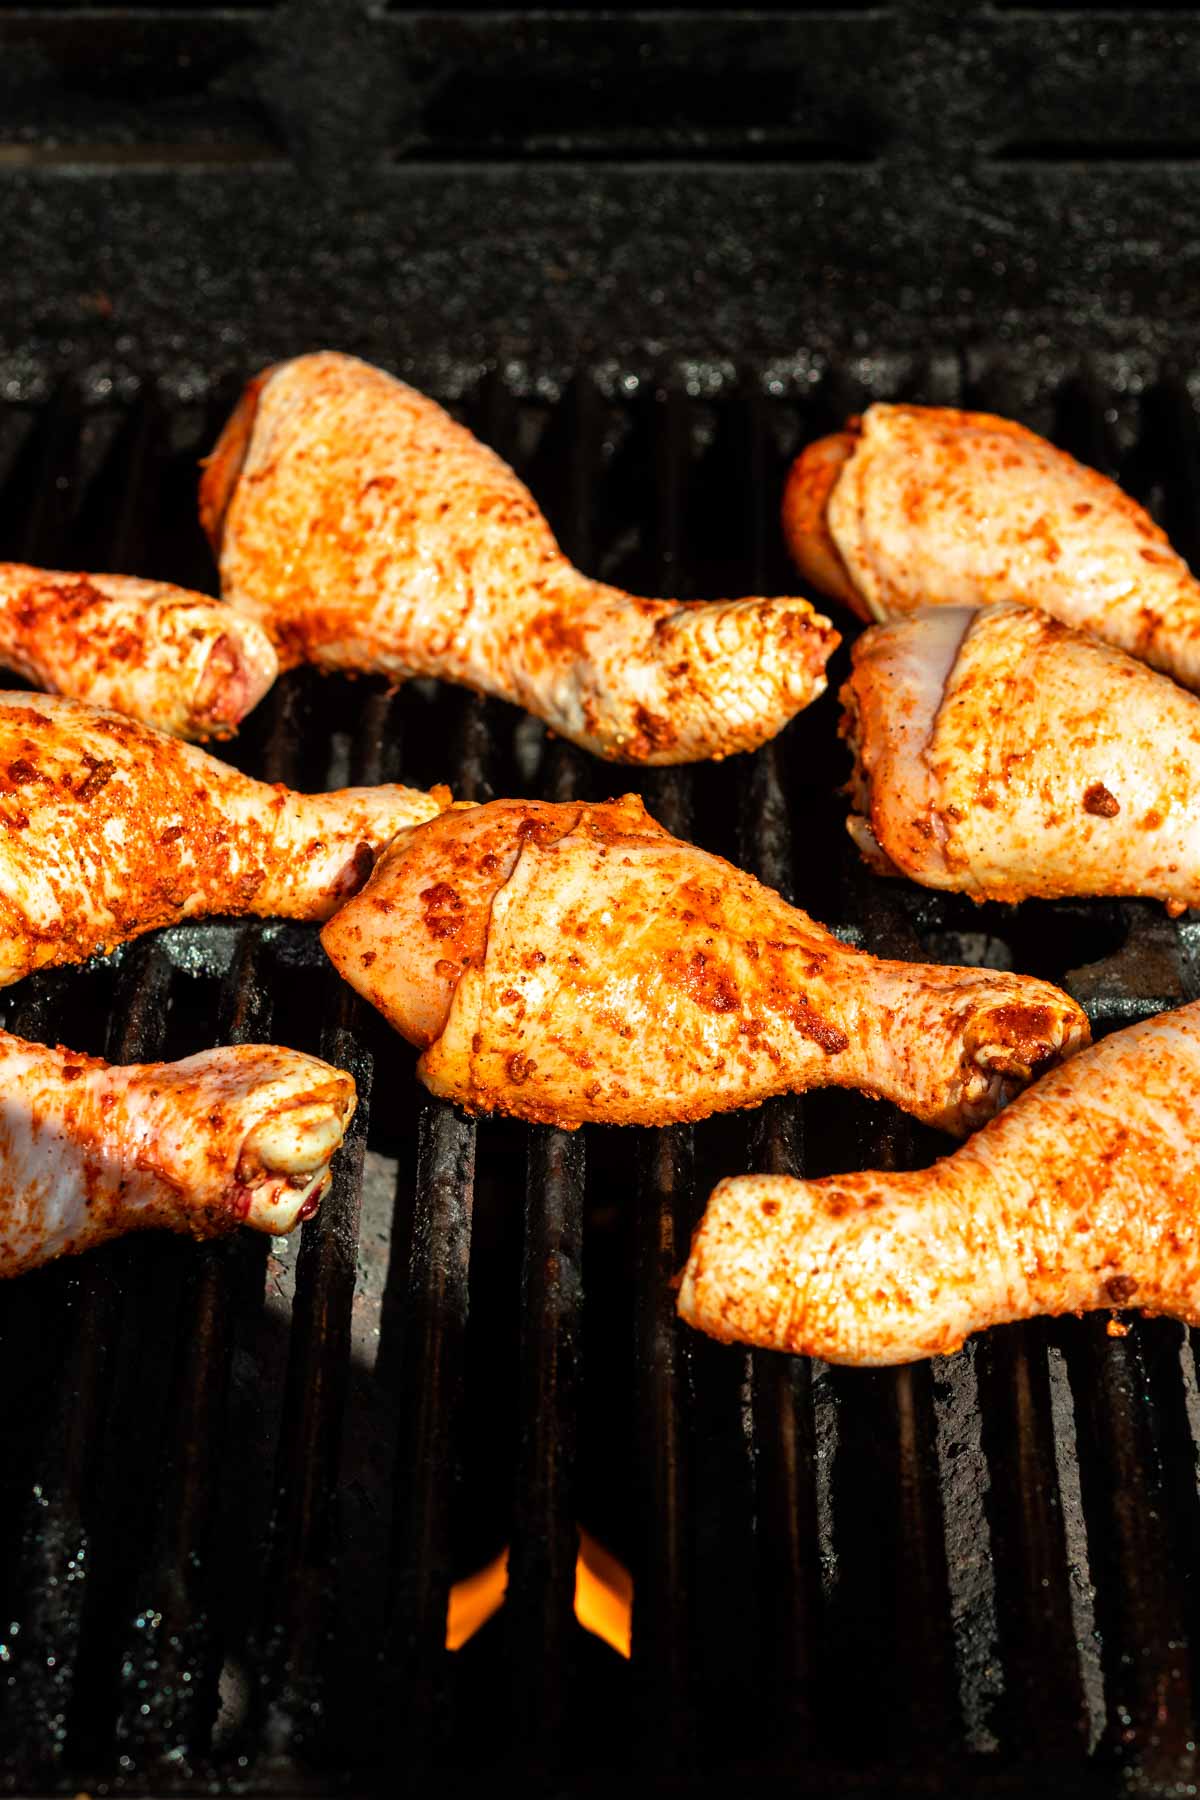 Uncooked chicken legs on a hot grill.